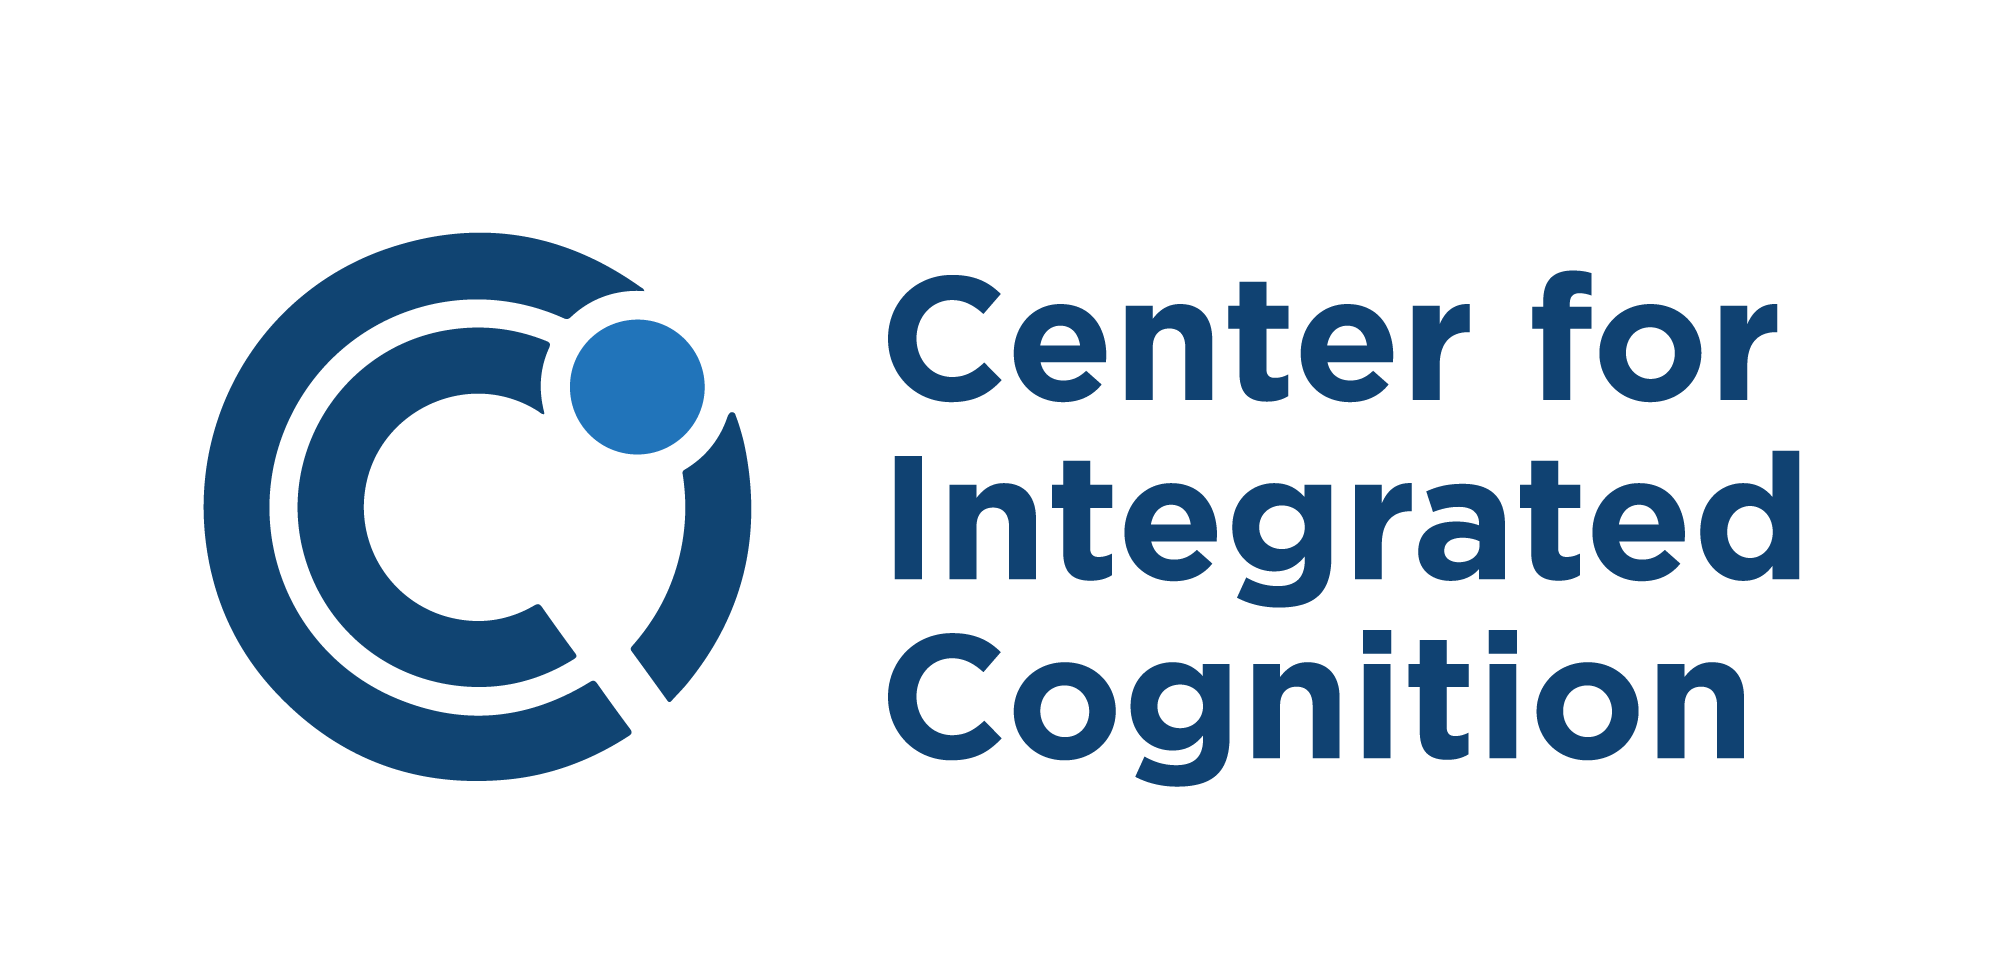 Center for Integrated Cognition